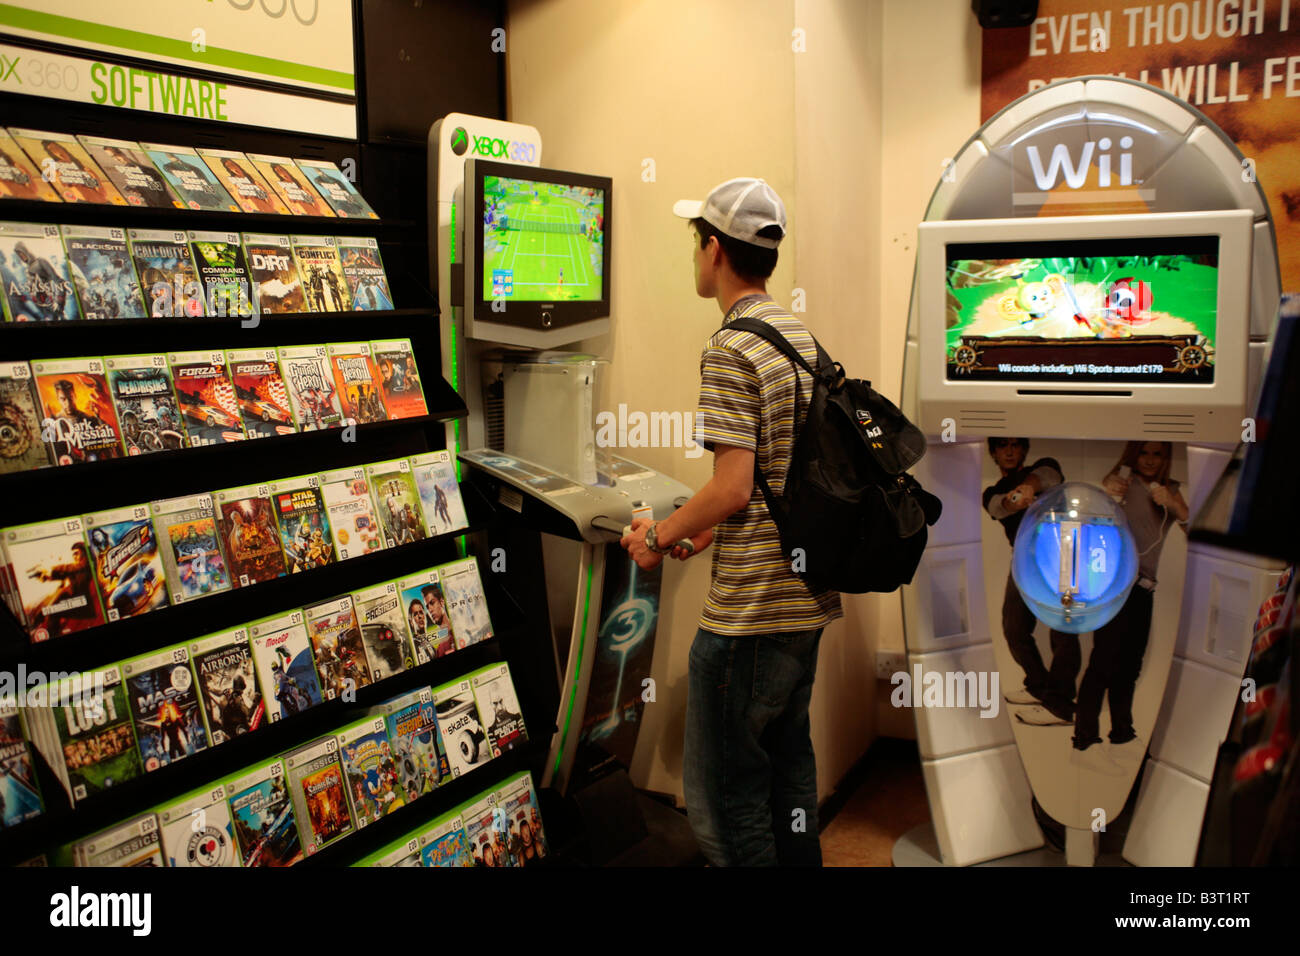 Xbox video games shalves editorial image. Image of store - 145521775